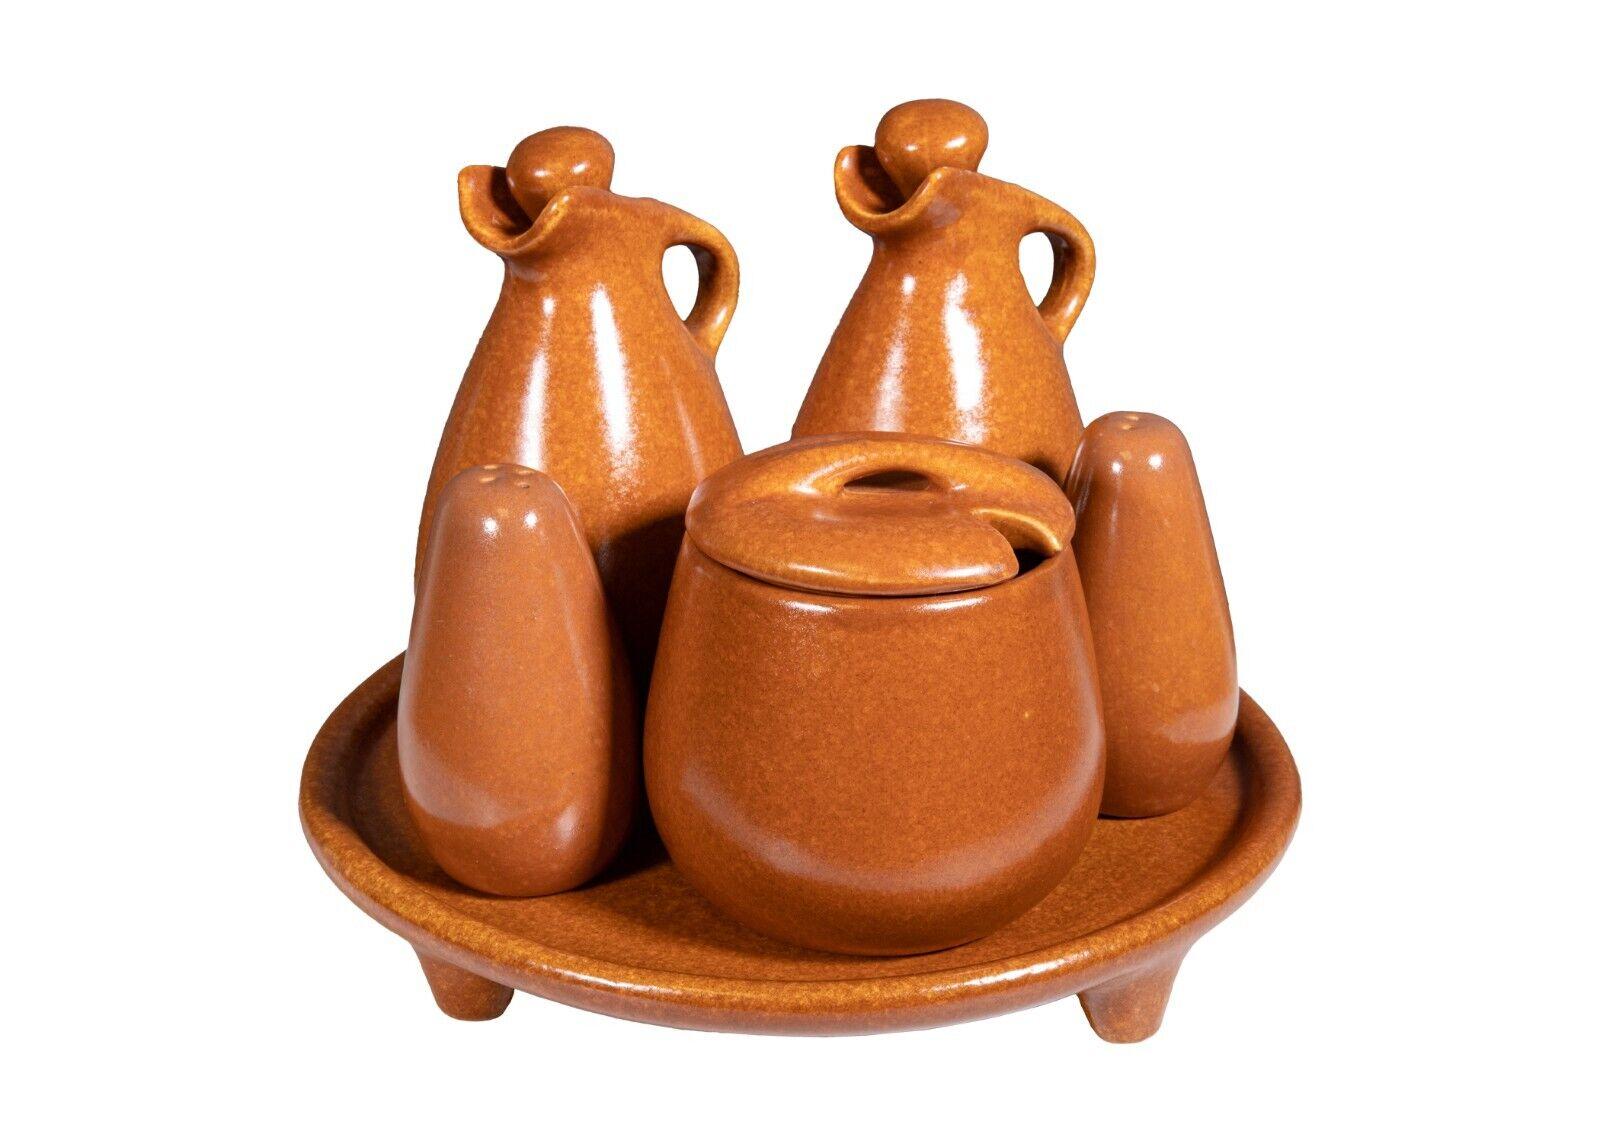 A 59 piece Ben Seibel Raymor Roseville matte terra cotta set. A massive set of Roseville Pottery. This gorgeous set of pottery designed by Ben Seibel for Roseville's Raymor collection. This set includes three sizes of plates, three sizes of bowls,